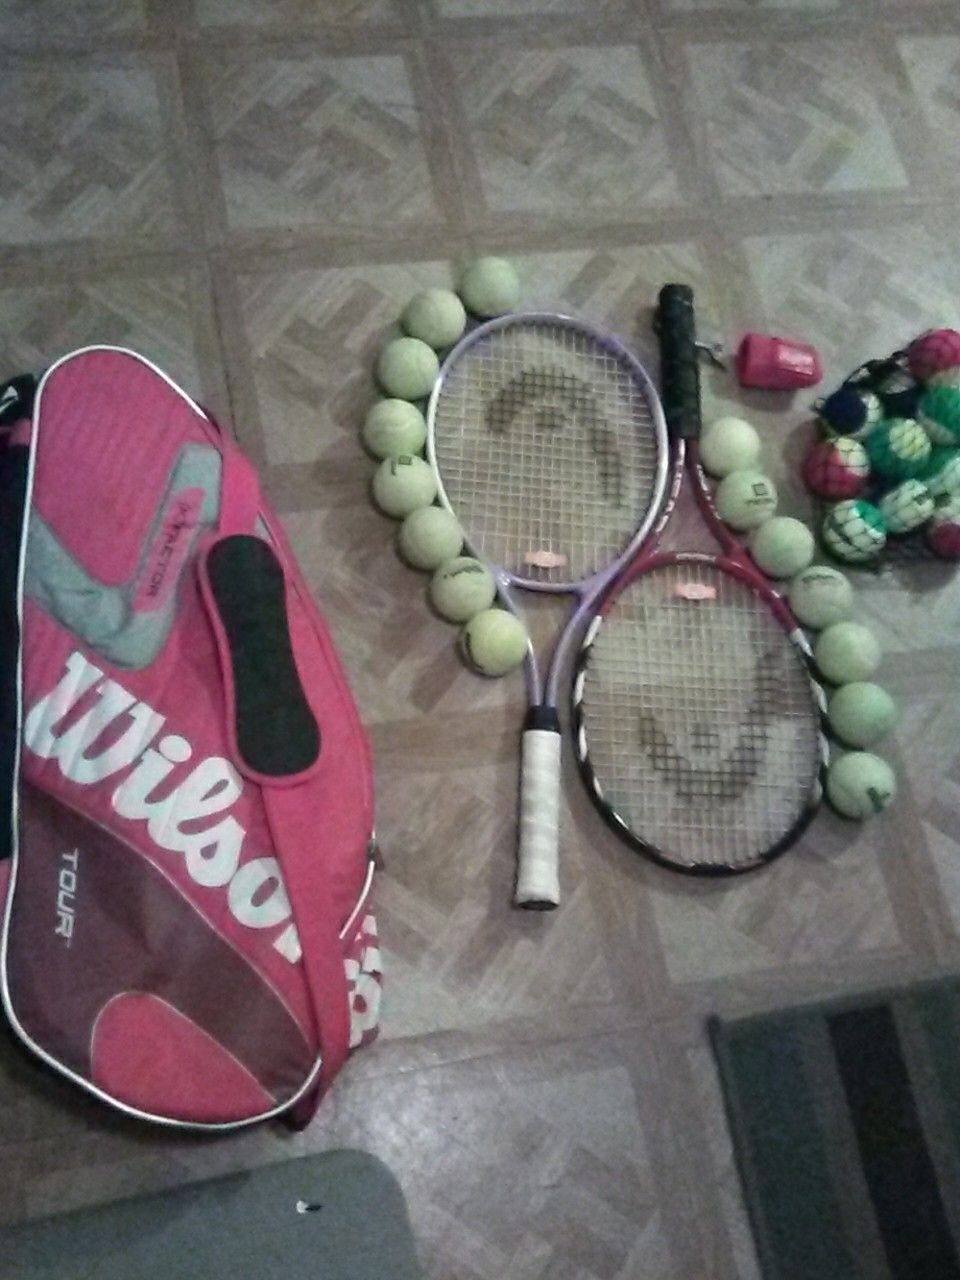 Man and woman's tennis rackets Head elite lite and tour pro. And Wilson (K) factor bag